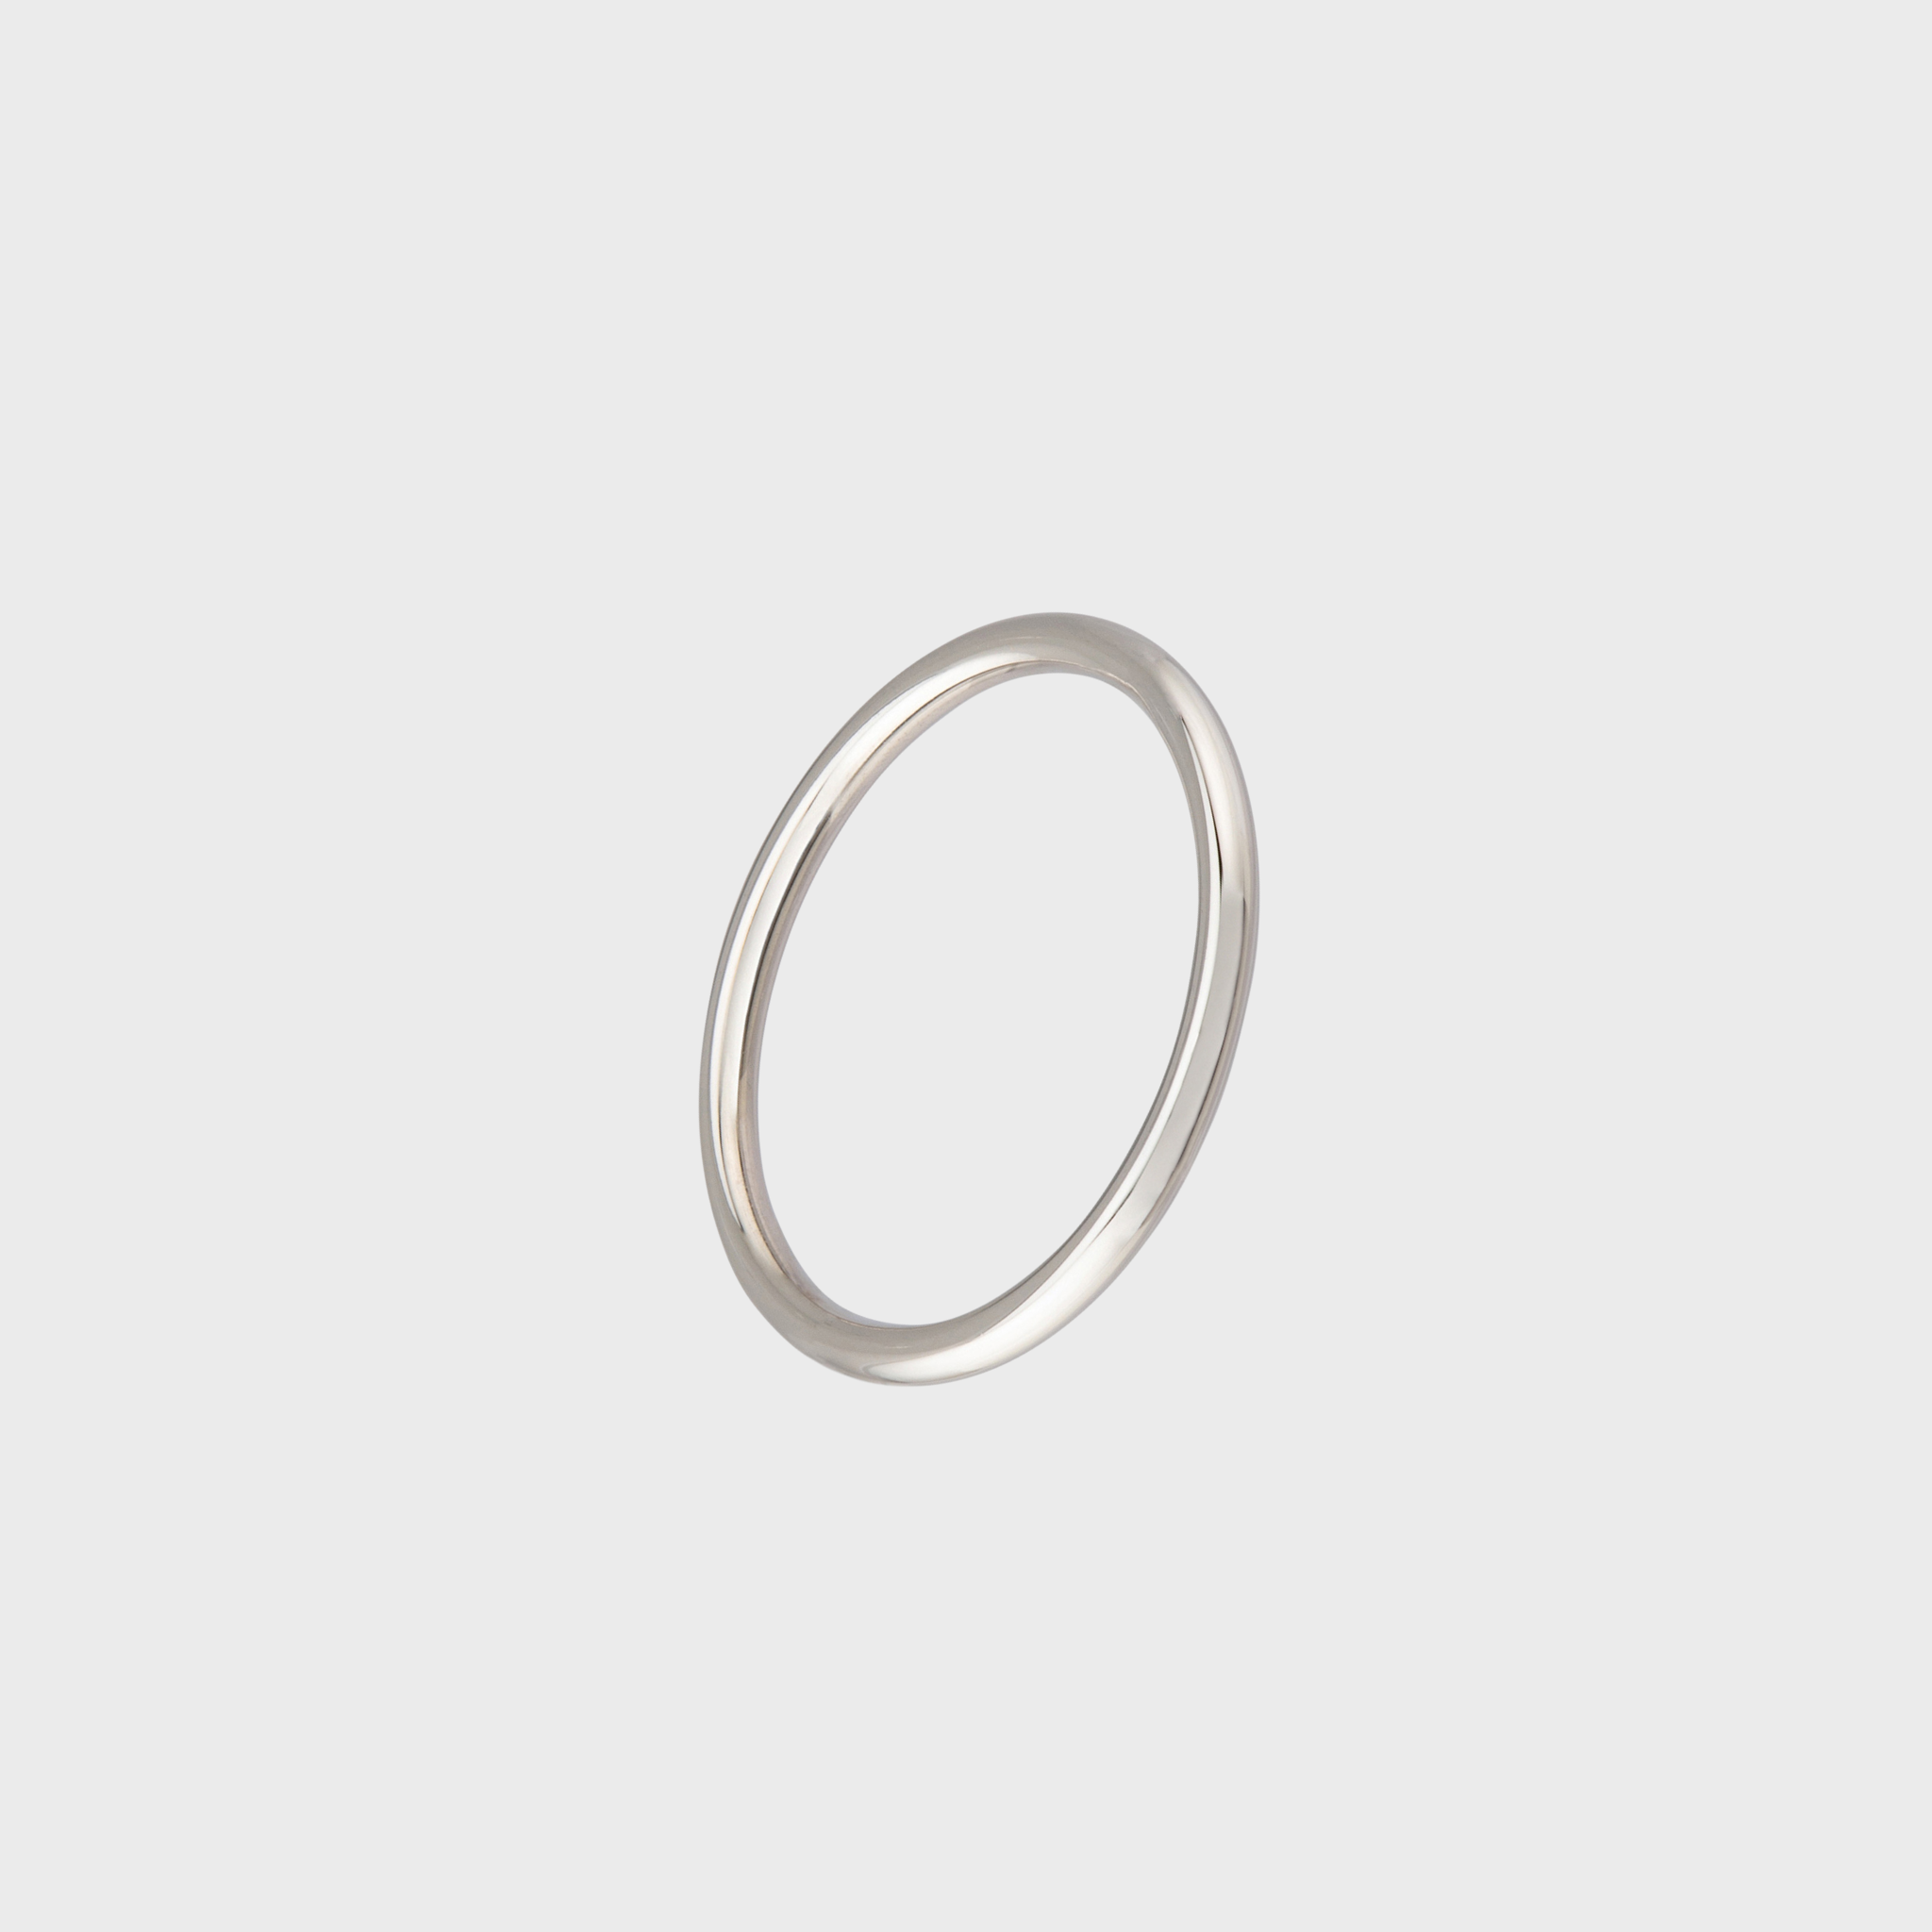 Stainless steel thin band ring